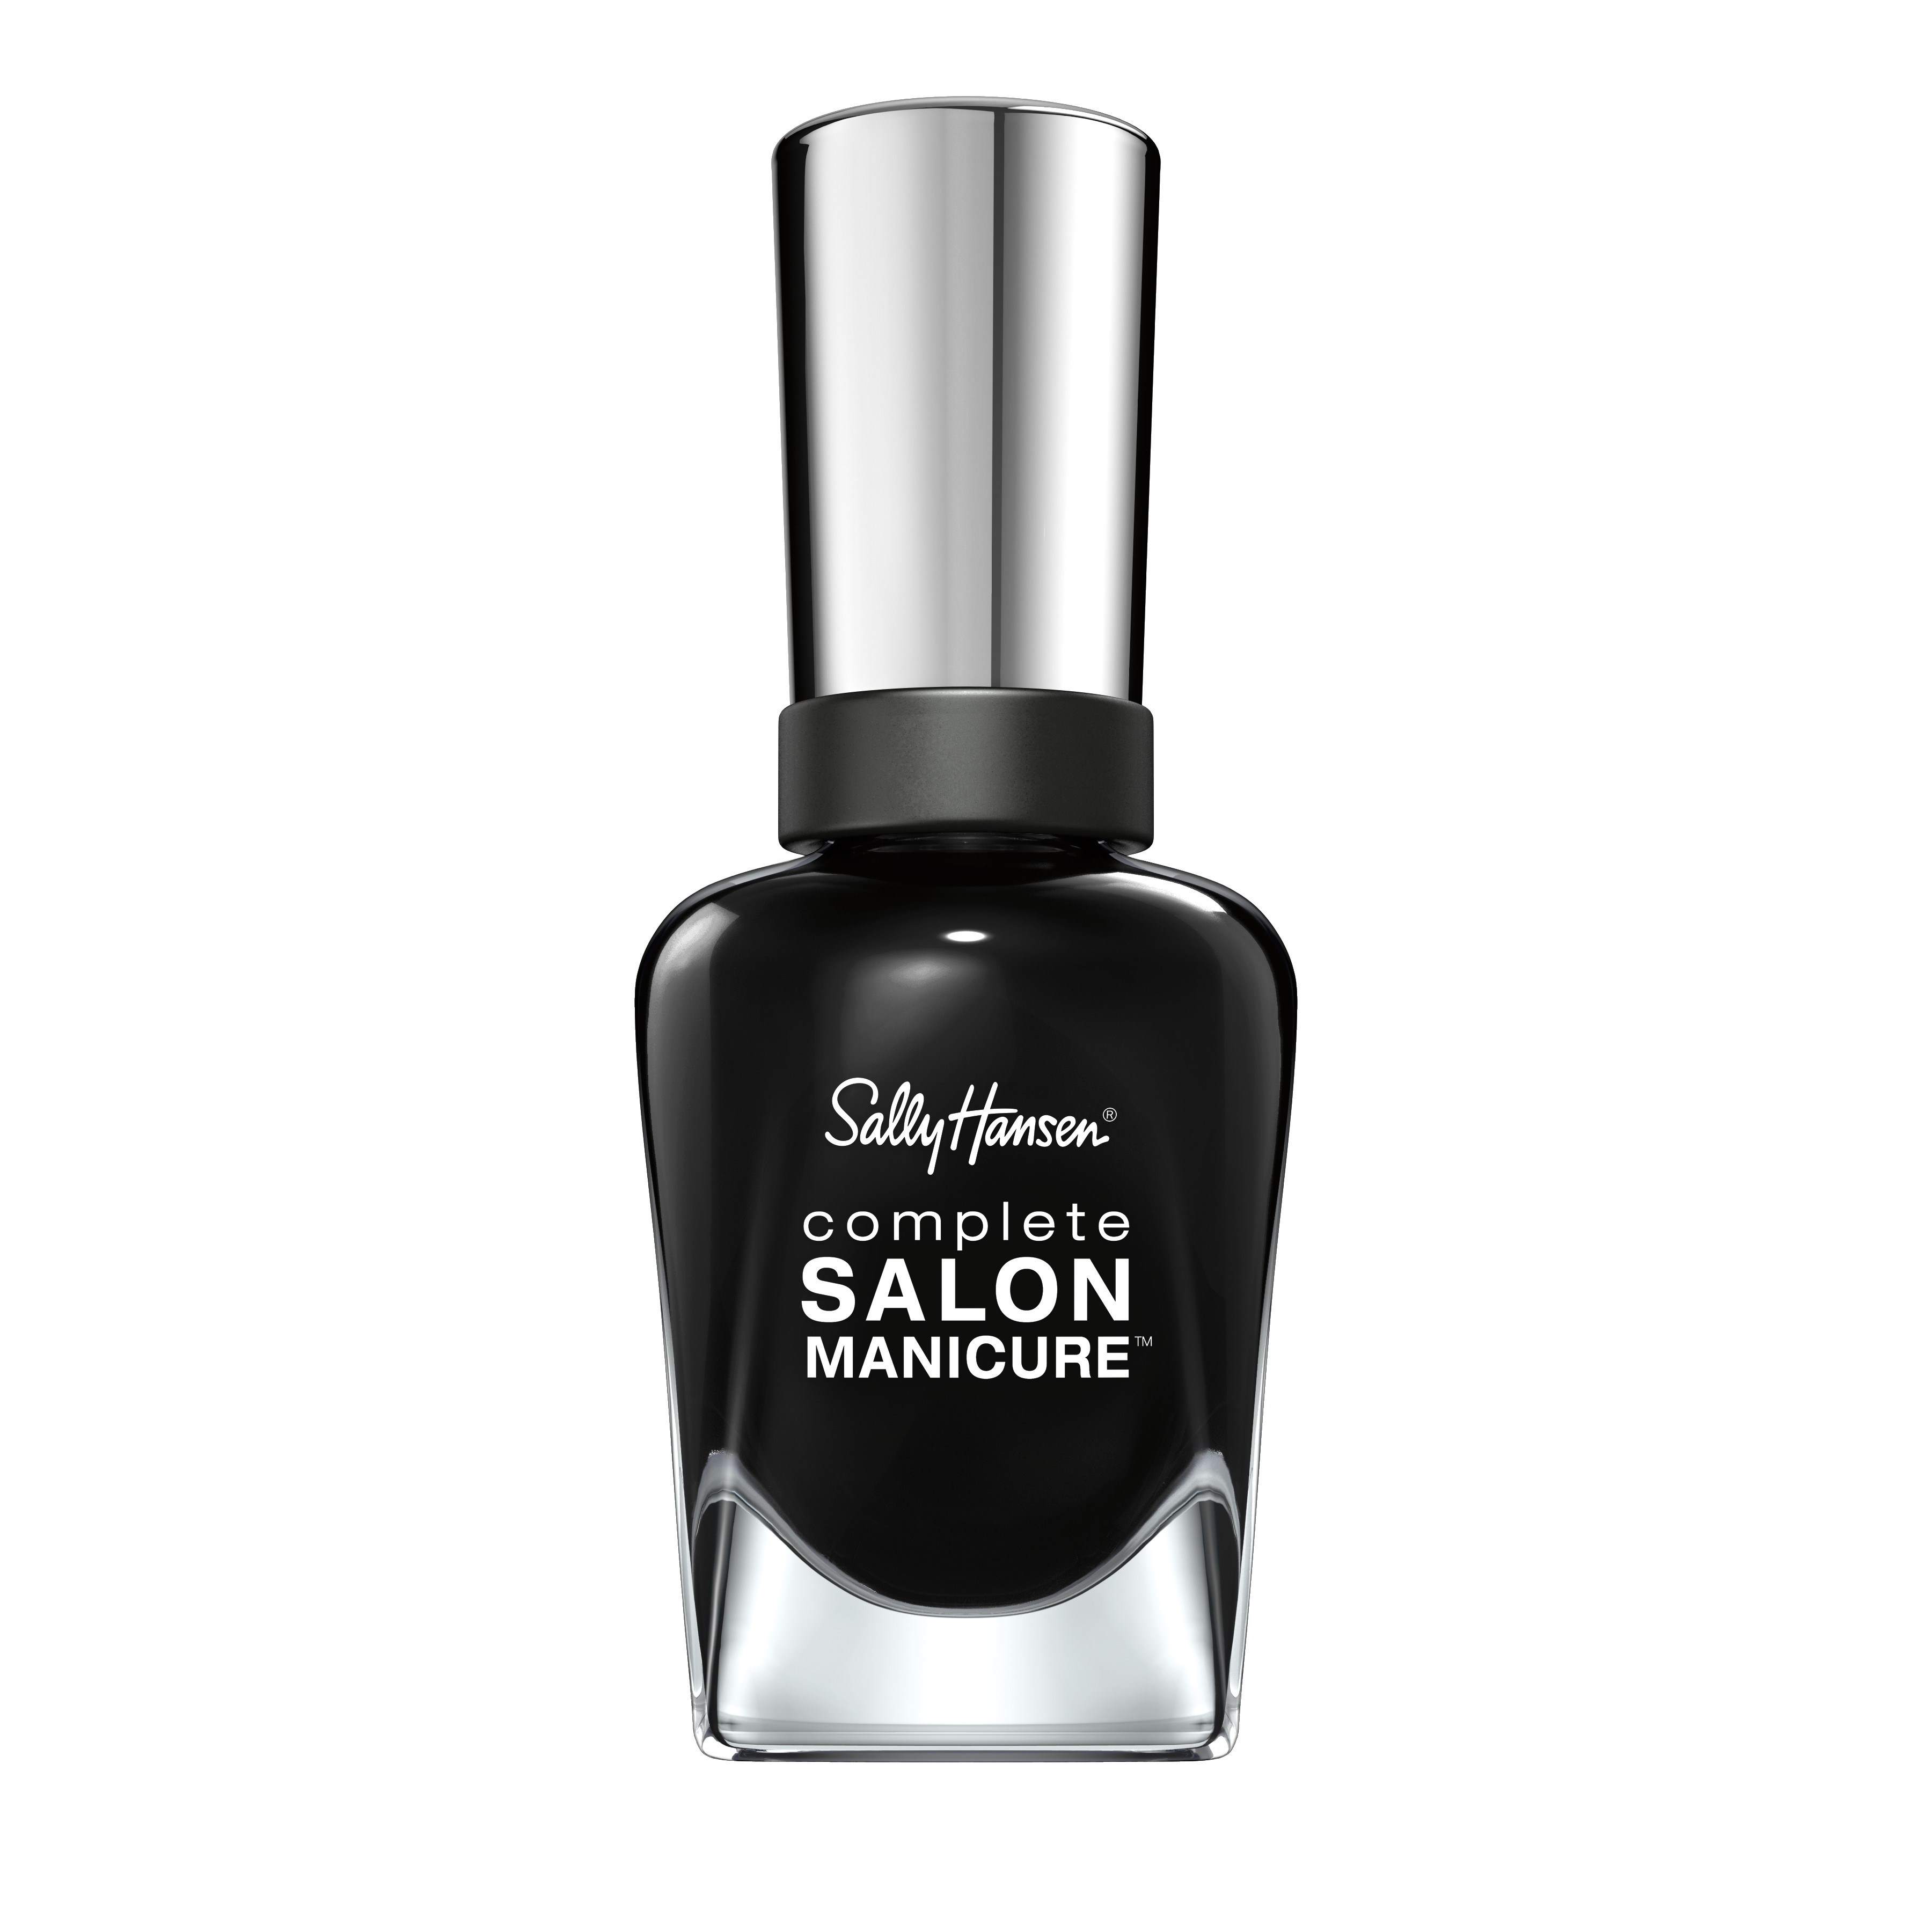 Sally Hansen Complete Salon Manicure Nail Color, Hooked on Onyx - image 1 of 2